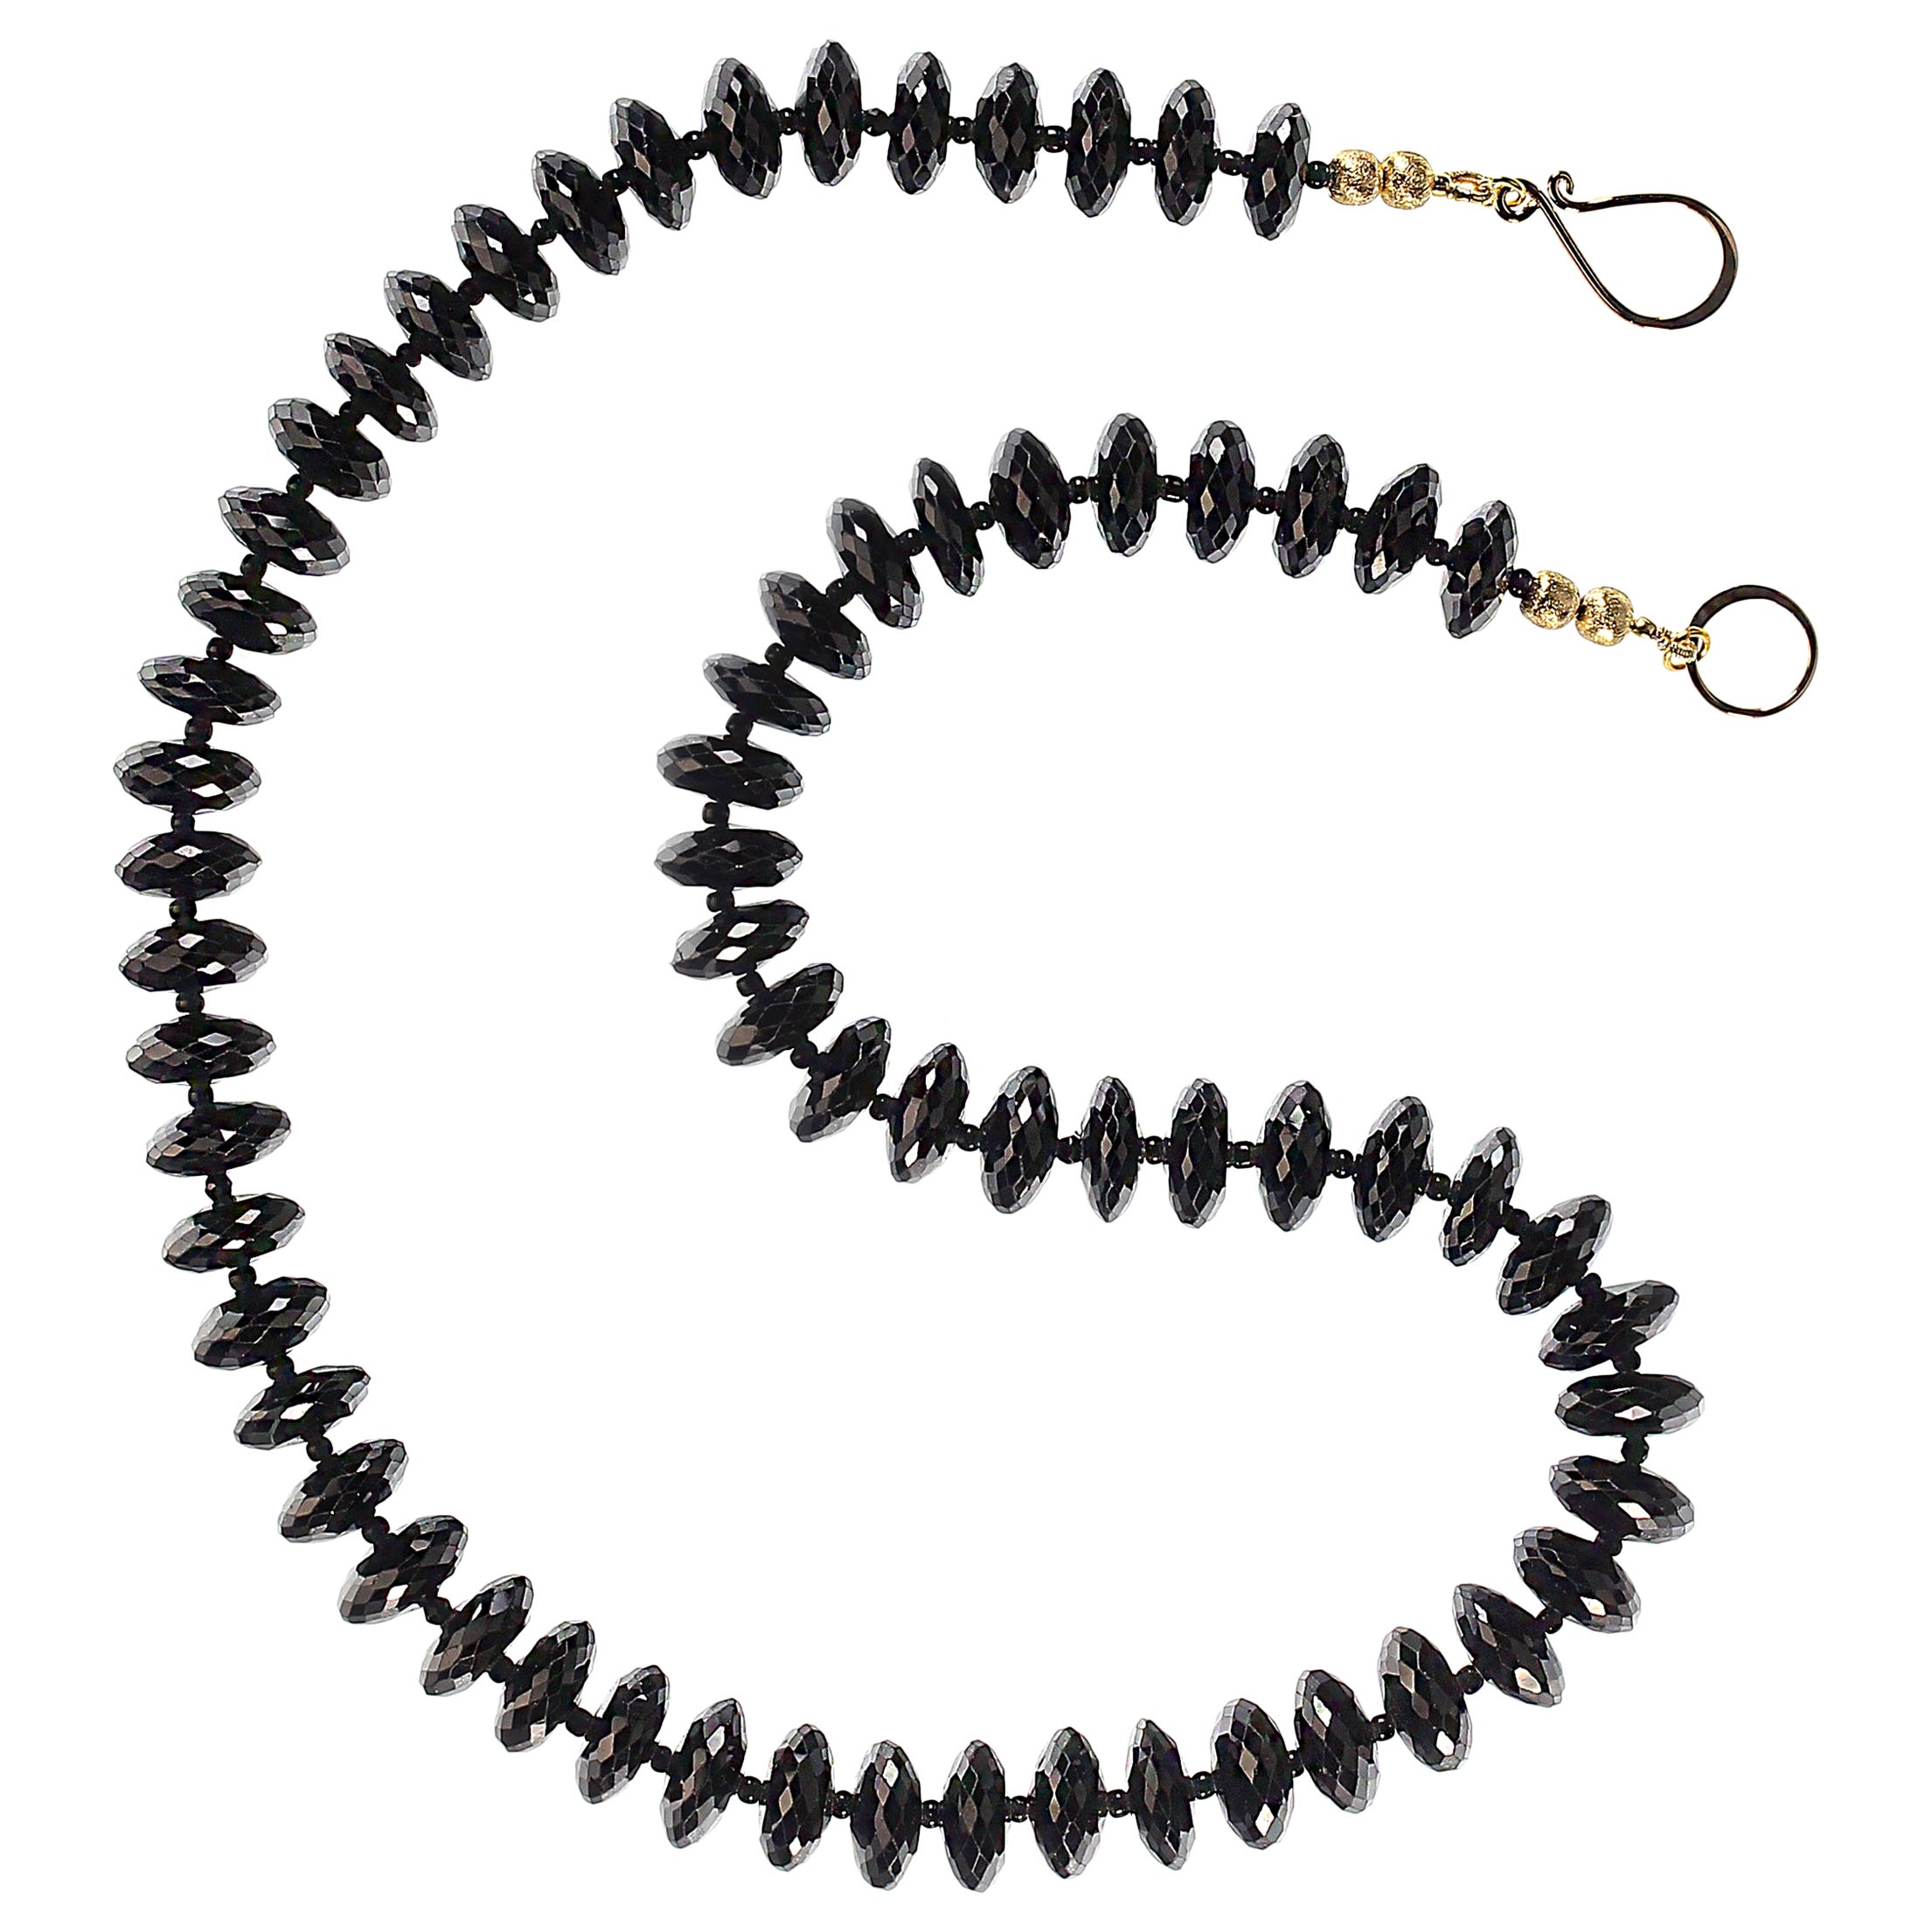 Fabulous black tourmaline rondelle necklace that is so sparkly is almost jumps off your neck!  This faceted black tourmaline necklace is just delightful and delicious.  You will love wearing this spectacular 18 inch necklace.  It is secured with a